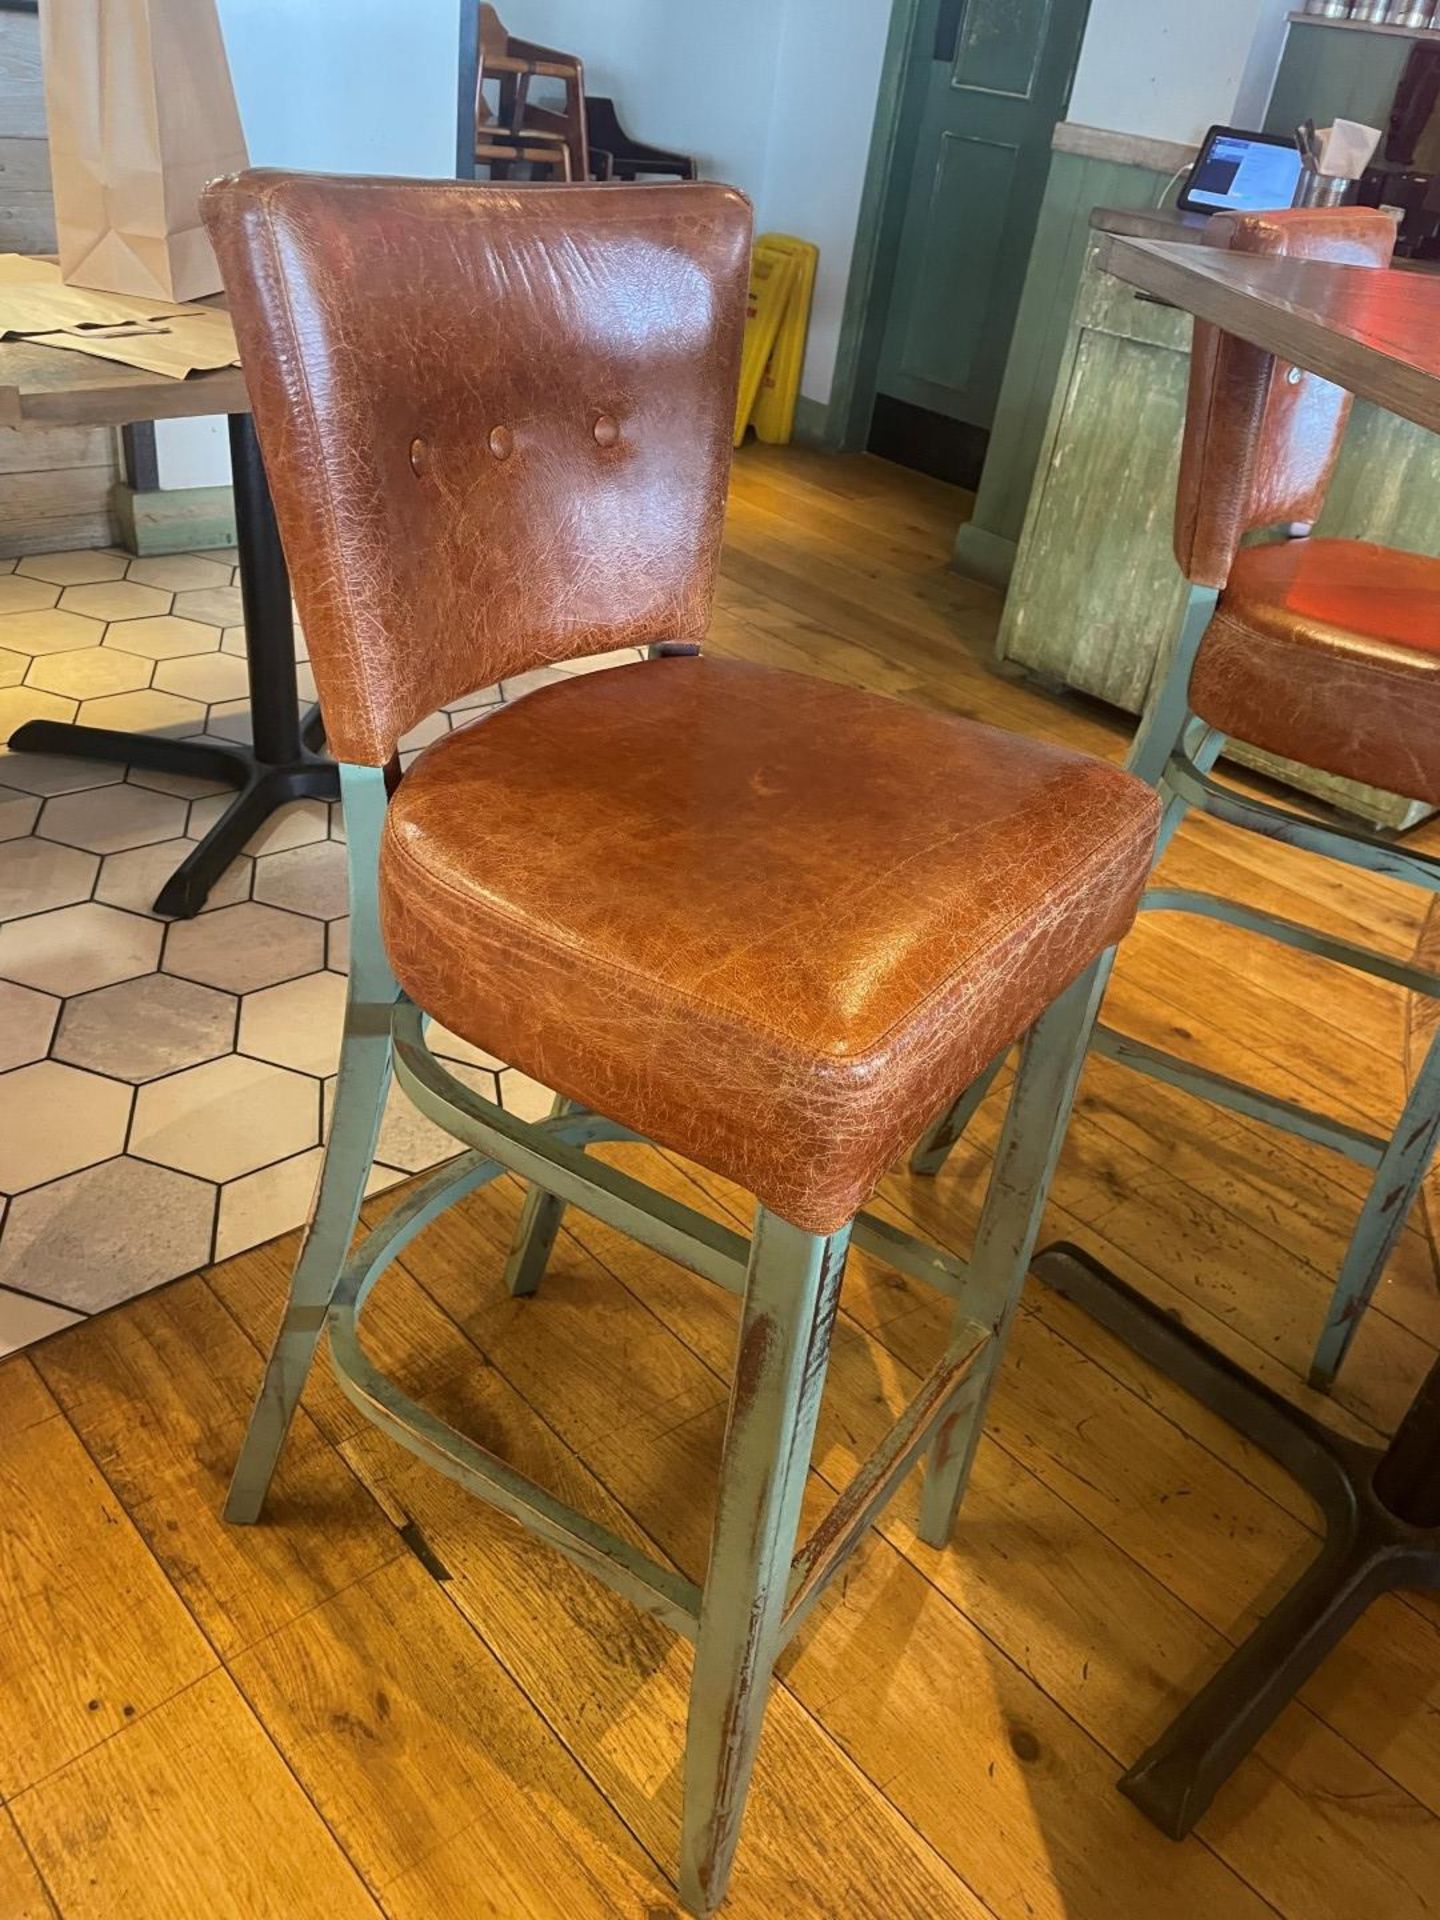 4 x Commercial Restaurant Bar Stools Featuring Wooden Frames With a Distressed Finish and Tan - Image 3 of 15